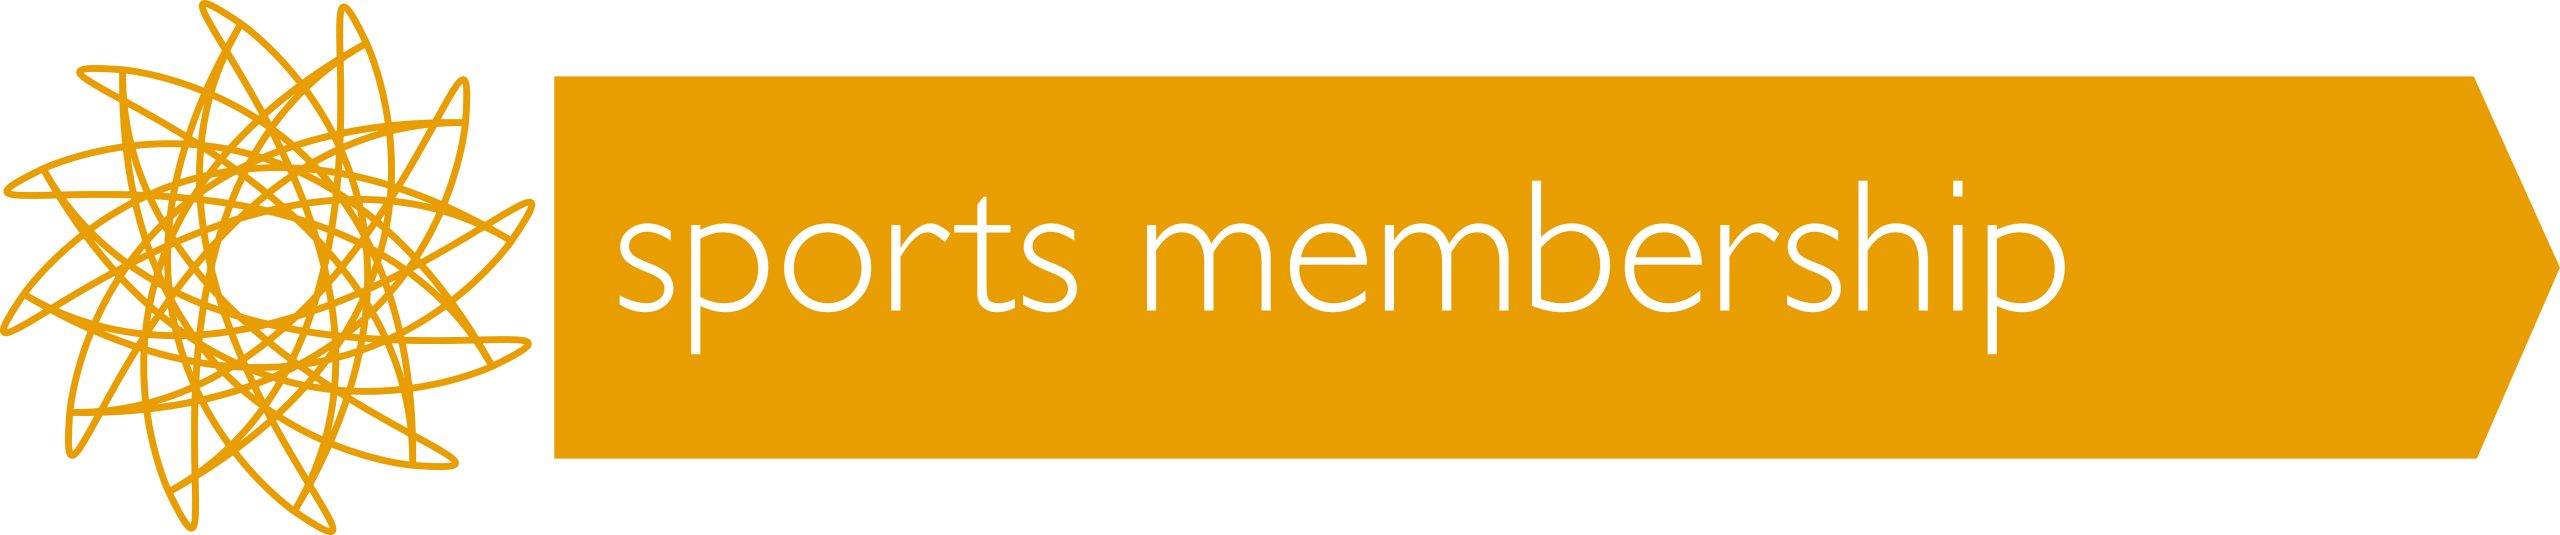 BECOME-A-MEMBER_SportsMembership